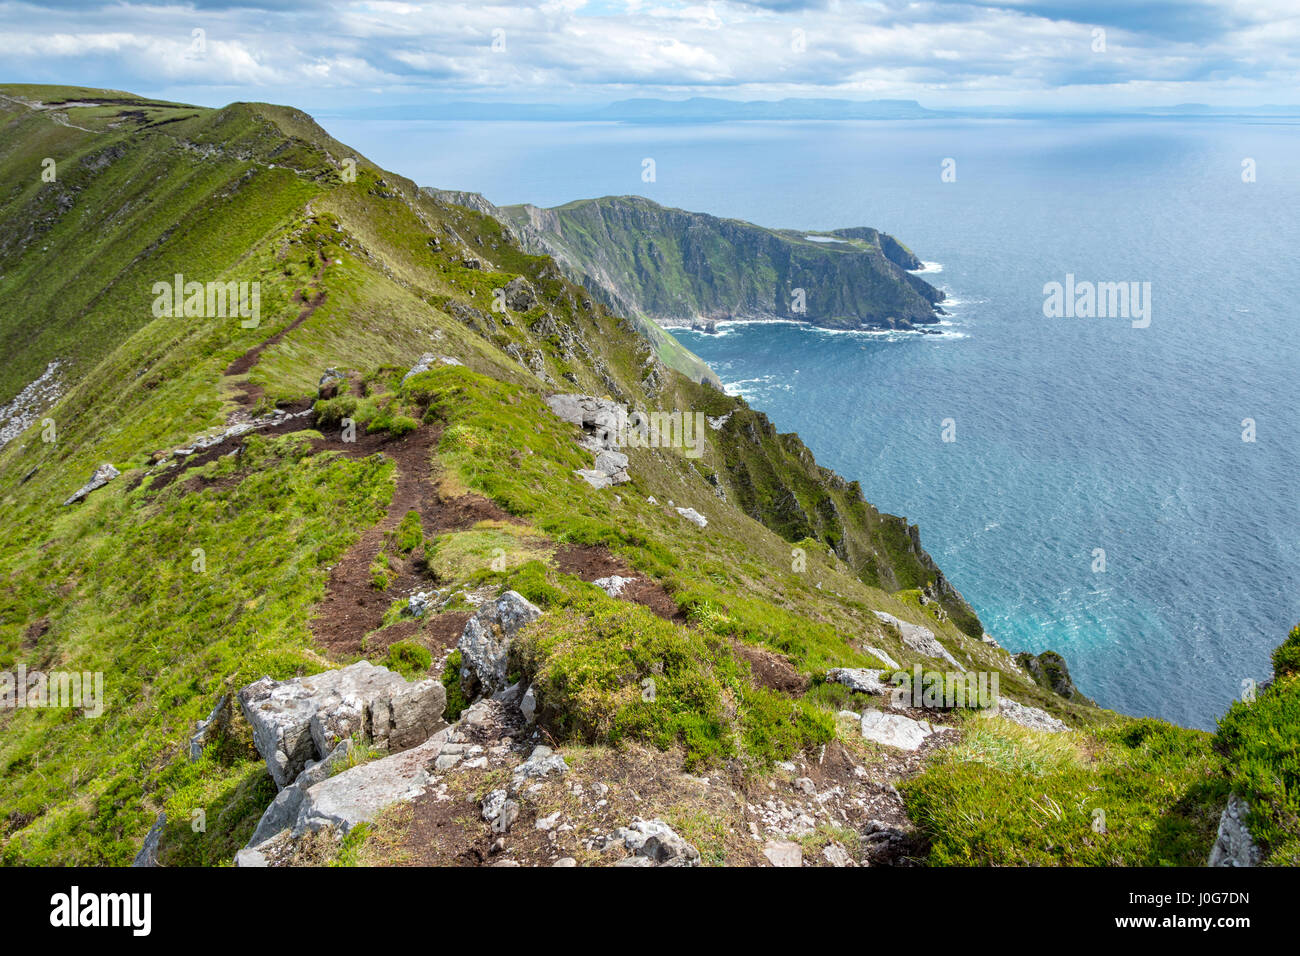 Looking down to the parking area and viewpoint at Amharc Mór from the summit ridge of Slieve League, County Donegal, Ireland Stock Photo